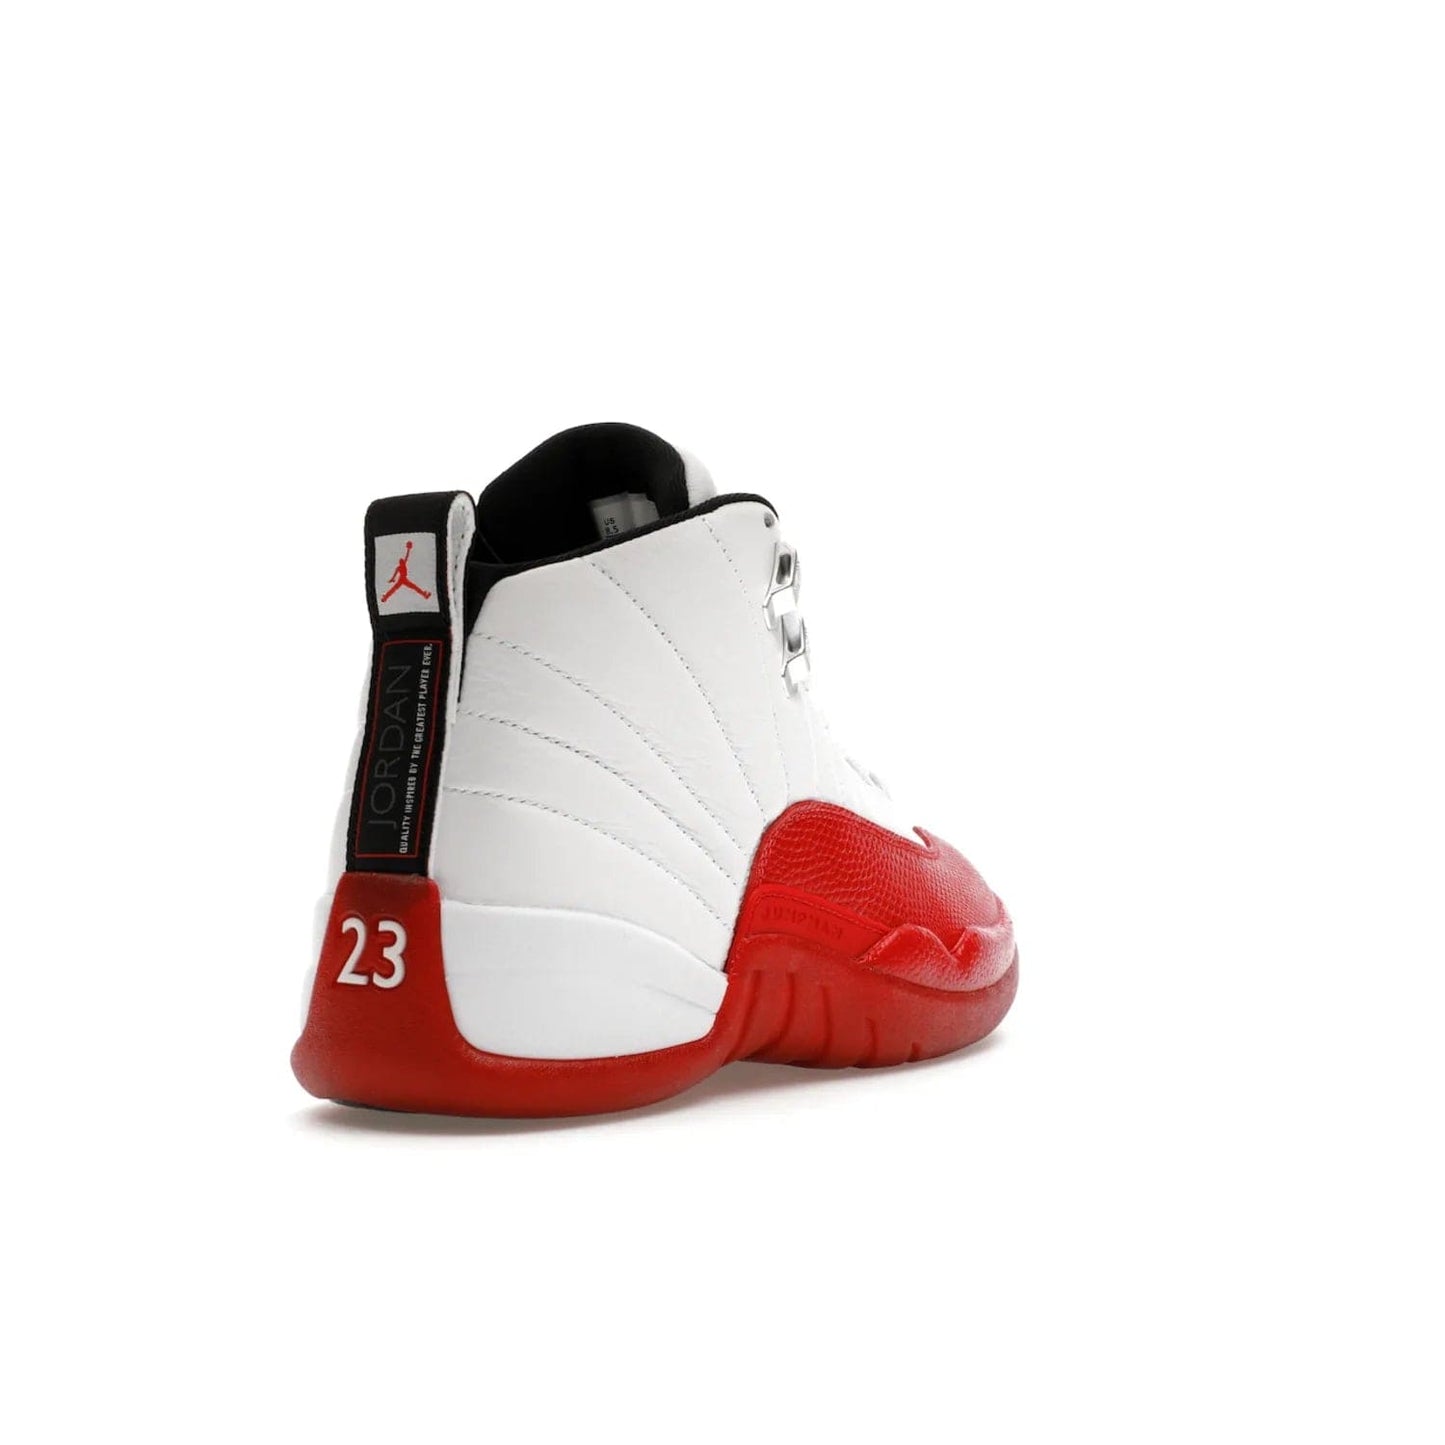 Jordan 12 Retro Cherry (2023) - Image 31 - Only at www.BallersClubKickz.com - Live your sneaker legend with the Jordan 12 Retro Cherry. Iconic pebbled leather mudguards, quilted uppers, and varsity red accents make this 1997 classic a must-have for 2023. Shine on with silver hardware and matching midsoles, and bring it all together for limited-edition style on October 28th. Step into Jordan legacy with the Retro Cherry.